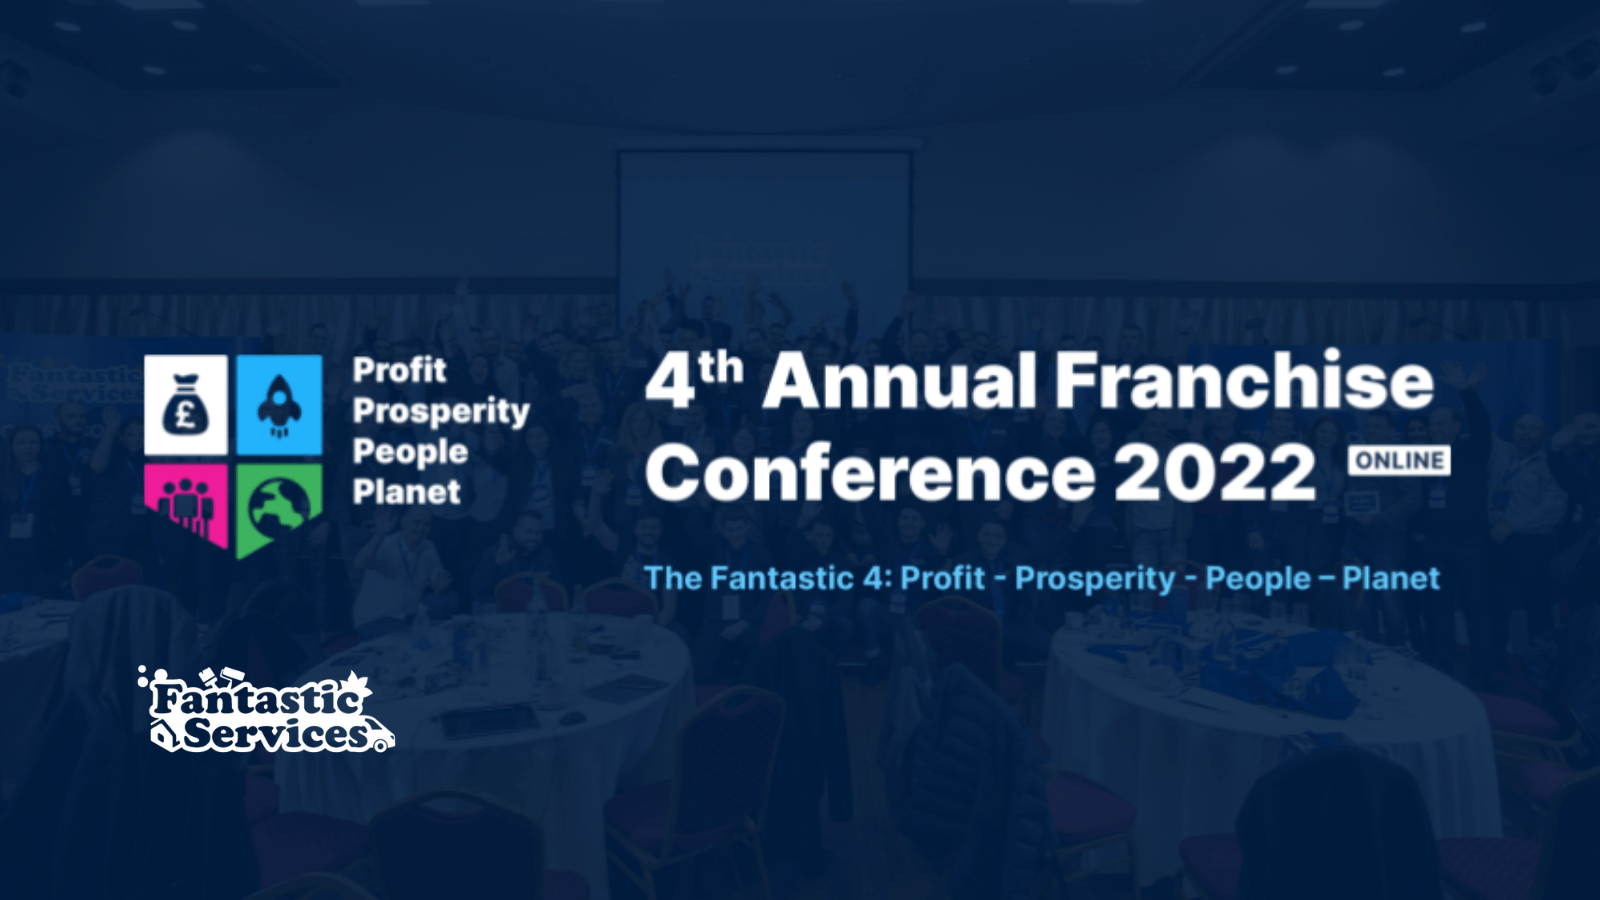 Fantastic Services gets ready for its fourth Annual Franchise Conference